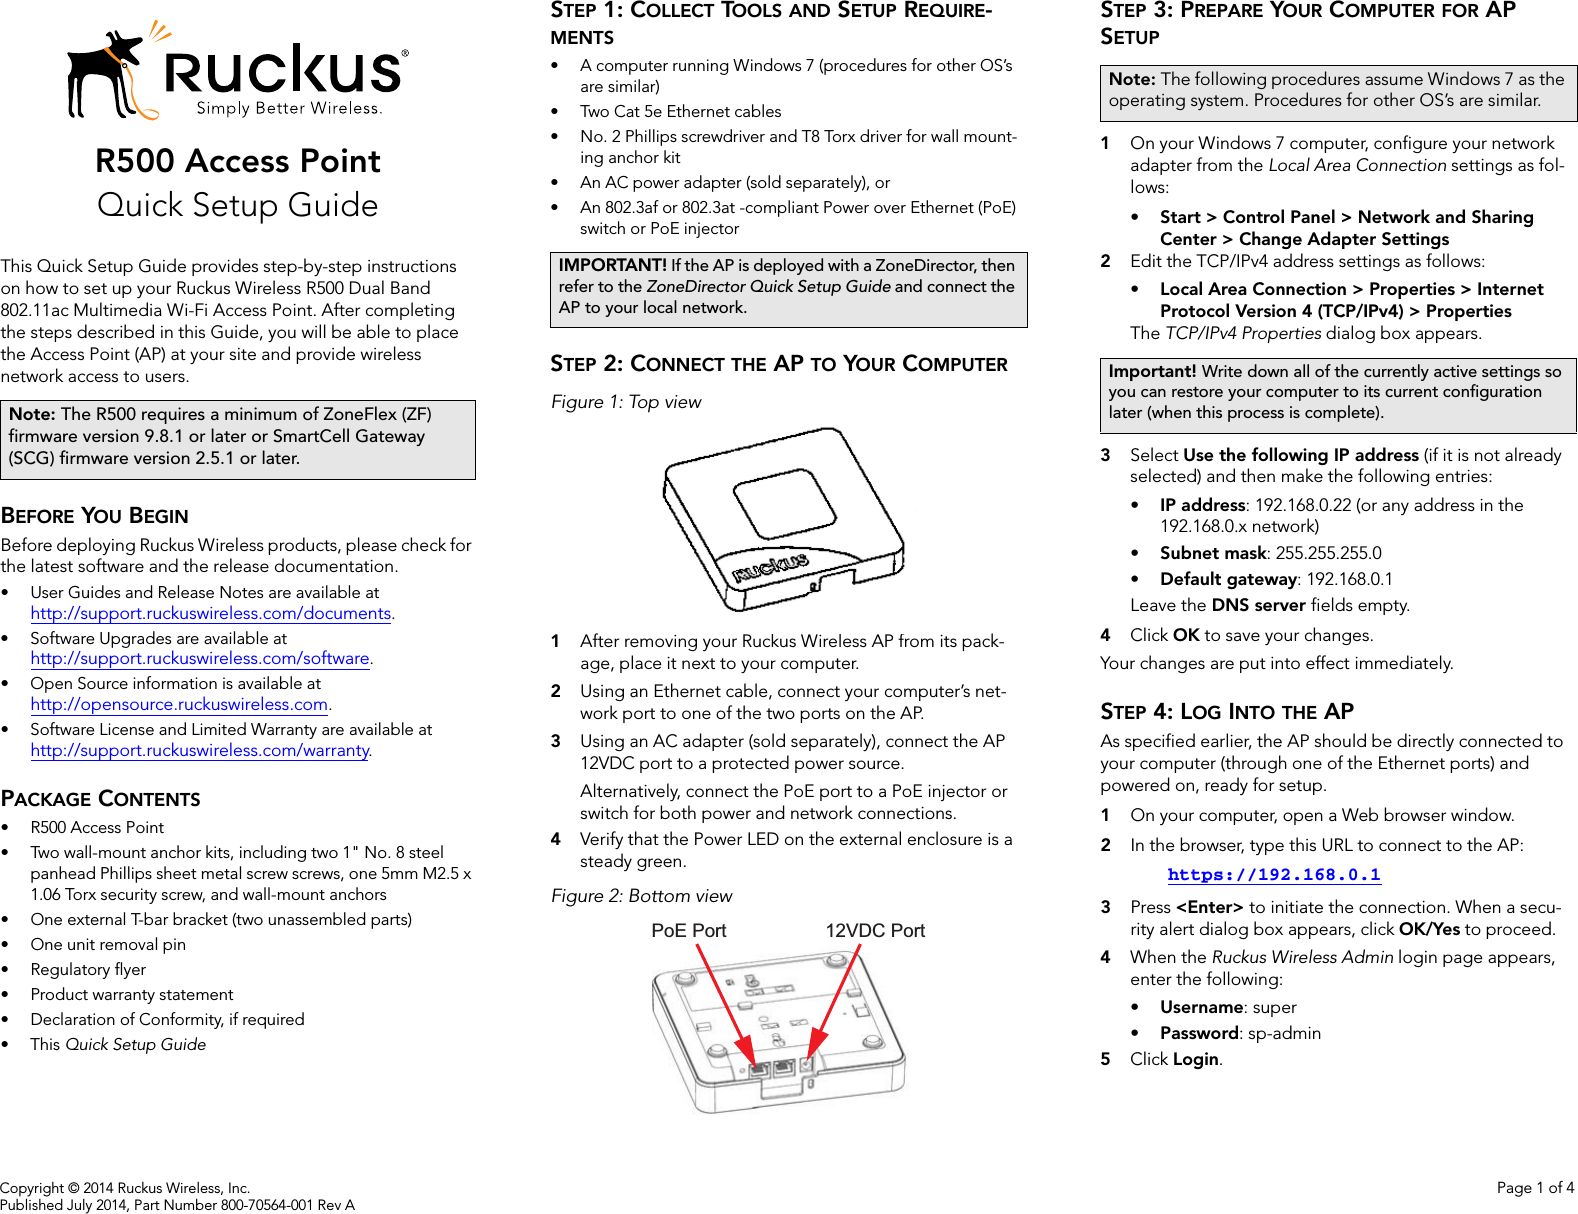 Copyright © 2014 Ruckus Wireless, Inc. Page 1 of 4Published July 2014, Part Number 800-70564-001 Rev AR500 Access PointQuick Setup GuideThis Quick Setup Guide provides step-by-step instructions on how to set up your Ruckus Wireless R500 Dual Band 802.11ac Multimedia Wi-Fi Access Point. After completing the steps described in this Guide, you will be able to place the Access Point (AP) at your site and provide wireless network access to users.BEFORE YOU BEGINBefore deploying Ruckus Wireless products, please check for the latest software and the release documentation.• User Guides and Release Notes are available at http://support.ruckuswireless.com/documents.• Software Upgrades are available athttp://support.ruckuswireless.com/software.• Open Source information is available athttp://opensource.ruckuswireless.com.• Software License and Limited Warranty are available at http://support.ruckuswireless.com/warranty.PACKAGE CONTENTS• R500 Access Point• Two wall-mount anchor kits, including two 1&quot; No. 8 steel panhead Phillips sheet metal screw screws, one 5mm M2.5 x 1.06 Torx security screw, and wall-mount anchors• One external T-bar bracket (two unassembled parts)• One unit removal pin• Regulatory flyer• Product warranty statement• Declaration of Conformity, if required•This Quick Setup GuideSTEP 1: COLLECT TOOLS AND SETUP REQUIRE-MENTS• A computer running Windows 7 (procedures for other OS’s are similar)• Two Cat 5e Ethernet cables• No. 2 Phillips screwdriver and T8 Torx driver for wall mount-ing anchor kit • An AC power adapter (sold separately), or• An 802.3af or 802.3at -compliant Power over Ethernet (PoE) switch or PoE injectorSTEP 2: CONNECT THE AP TO YOUR COMPUTERFigure 1: Top view1After removing your Ruckus Wireless AP from its pack-age, place it next to your computer.2Using an Ethernet cable, connect your computer’s net-work port to one of the two ports on the AP. 3Using an AC adapter (sold separately), connect the AP 12VDC port to a protected power source. Alternatively, connect the PoE port to a PoE injector or switch for both power and network connections.4Verify that the Power LED on the external enclosure is a steady green.Figure 2: Bottom viewSTEP 3: PREPARE YOUR COMPUTER FOR AP SETUP1On your Windows 7 computer, configure your network adapter from the Local Area Connection settings as fol-lows:• Start &gt; Control Panel &gt; Network and Sharing Center &gt; Change Adapter Settings2Edit the TCP/IPv4 address settings as follows: • Local Area Connection &gt; Properties &gt; Internet Protocol Version 4 (TCP/IPv4) &gt; PropertiesThe TCP/IPv4 Properties dialog box appears.3Select Use the following IP address (if it is not already selected) and then make the following entries:•IP address: 192.168.0.22 (or any address in the 192.168.0.x network)•Subnet mask: 255.255.255.0•Default gateway: 192.168.0.1Leave the DNS server fields empty.4Click OK to save your changes.Your changes are put into effect immediately. STEP 4: LOG INTO THE APAs specified earlier, the AP should be directly connected to your computer (through one of the Ethernet ports) and powered on, ready for setup.1On your computer, open a Web browser window.2In the browser, type this URL to connect to the AP: https://192.168.0.13Press &lt;Enter&gt; to initiate the connection. When a secu-rity alert dialog box appears, click OK/Yes to proceed.4When the Ruckus Wireless Admin login page appears, enter the following: •Username: super•Password: sp-admin5Click Login.Note: The R500 requires a minimum of ZoneFlex (ZF) firmware version 9.8.1 or later or SmartCell Gateway (SCG) firmware version 2.5.1 or later.IMPORTANT! If the AP is deployed with a ZoneDirector, then refer to the ZoneDirector Quick Setup Guide and connect the AP to your local network.PoE Port 12VDC PortNote: The following procedures assume Windows 7 as the operating system. Procedures for other OS’s are similar.Important! Write down all of the currently active settings so you can restore your computer to its current configuration later (when this process is complete).